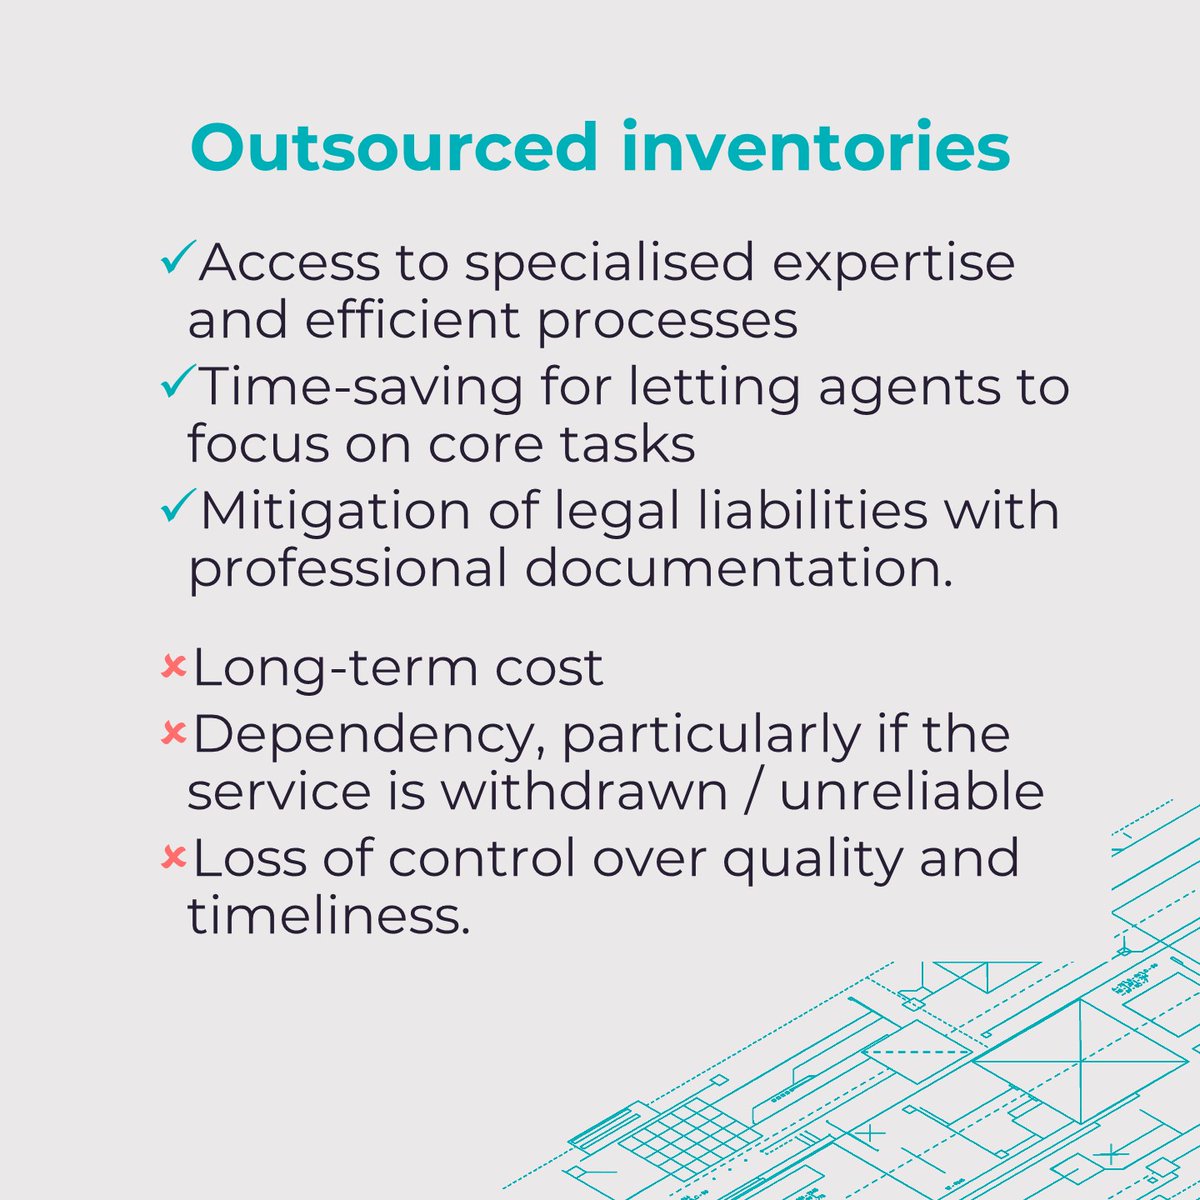 Letting agents know the cost of compiling inventories is high. It's higher if you get it wrong. Scroll to see the pro's and con's of outsourcing inventories vs doing them in-house. Learn more: ow.ly/YfvZ50R98fB #Lettings #PropertyAgent #PropertyAgency #Propertymark